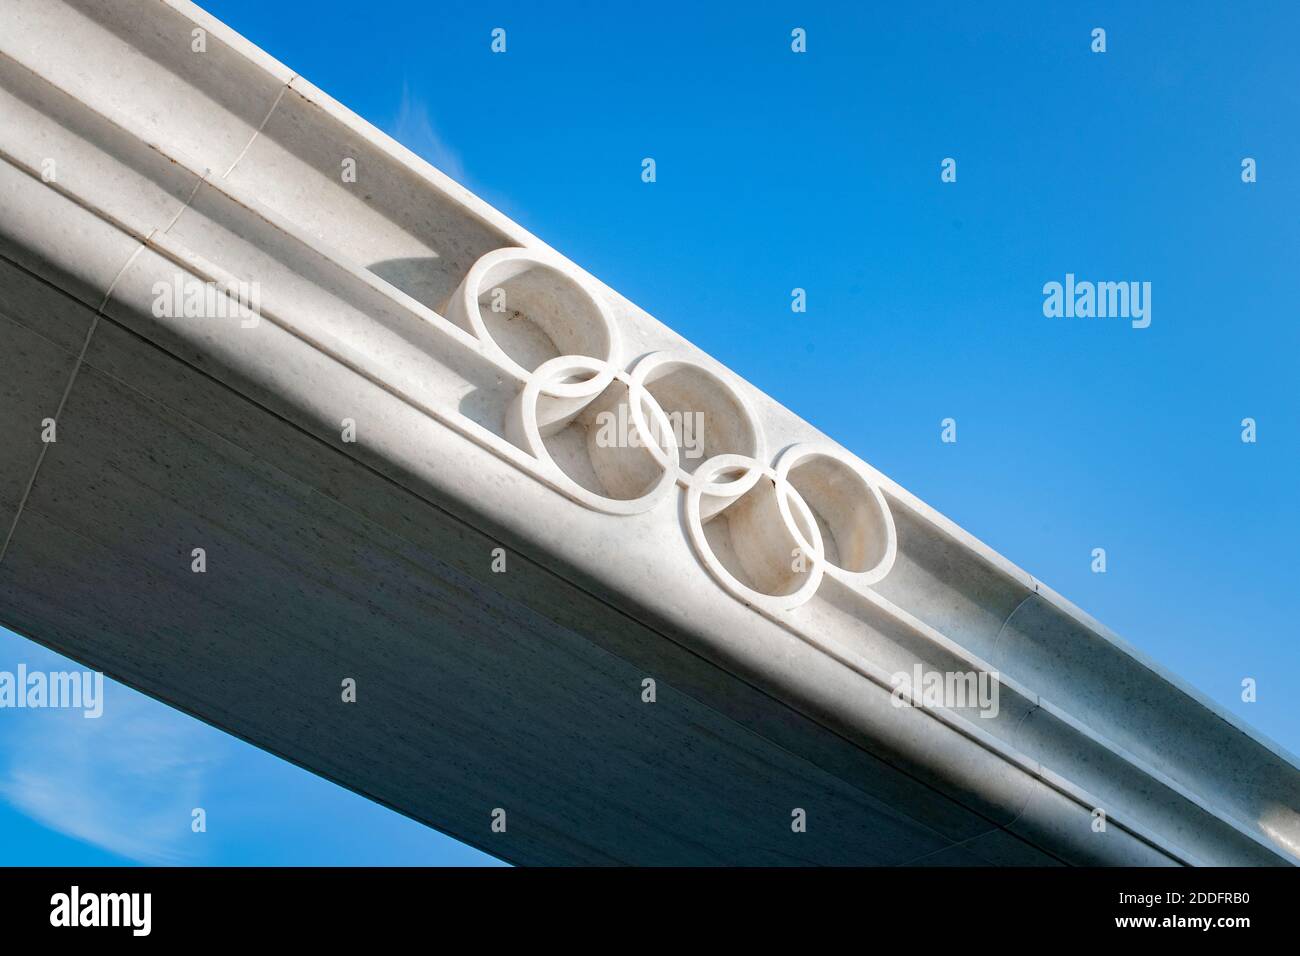 The Olympic Rings logo is pictured in front of the headquarters of the International Olympic Committee (IOC) in Lausanne  Swittzerland on November 22t Stock Photo